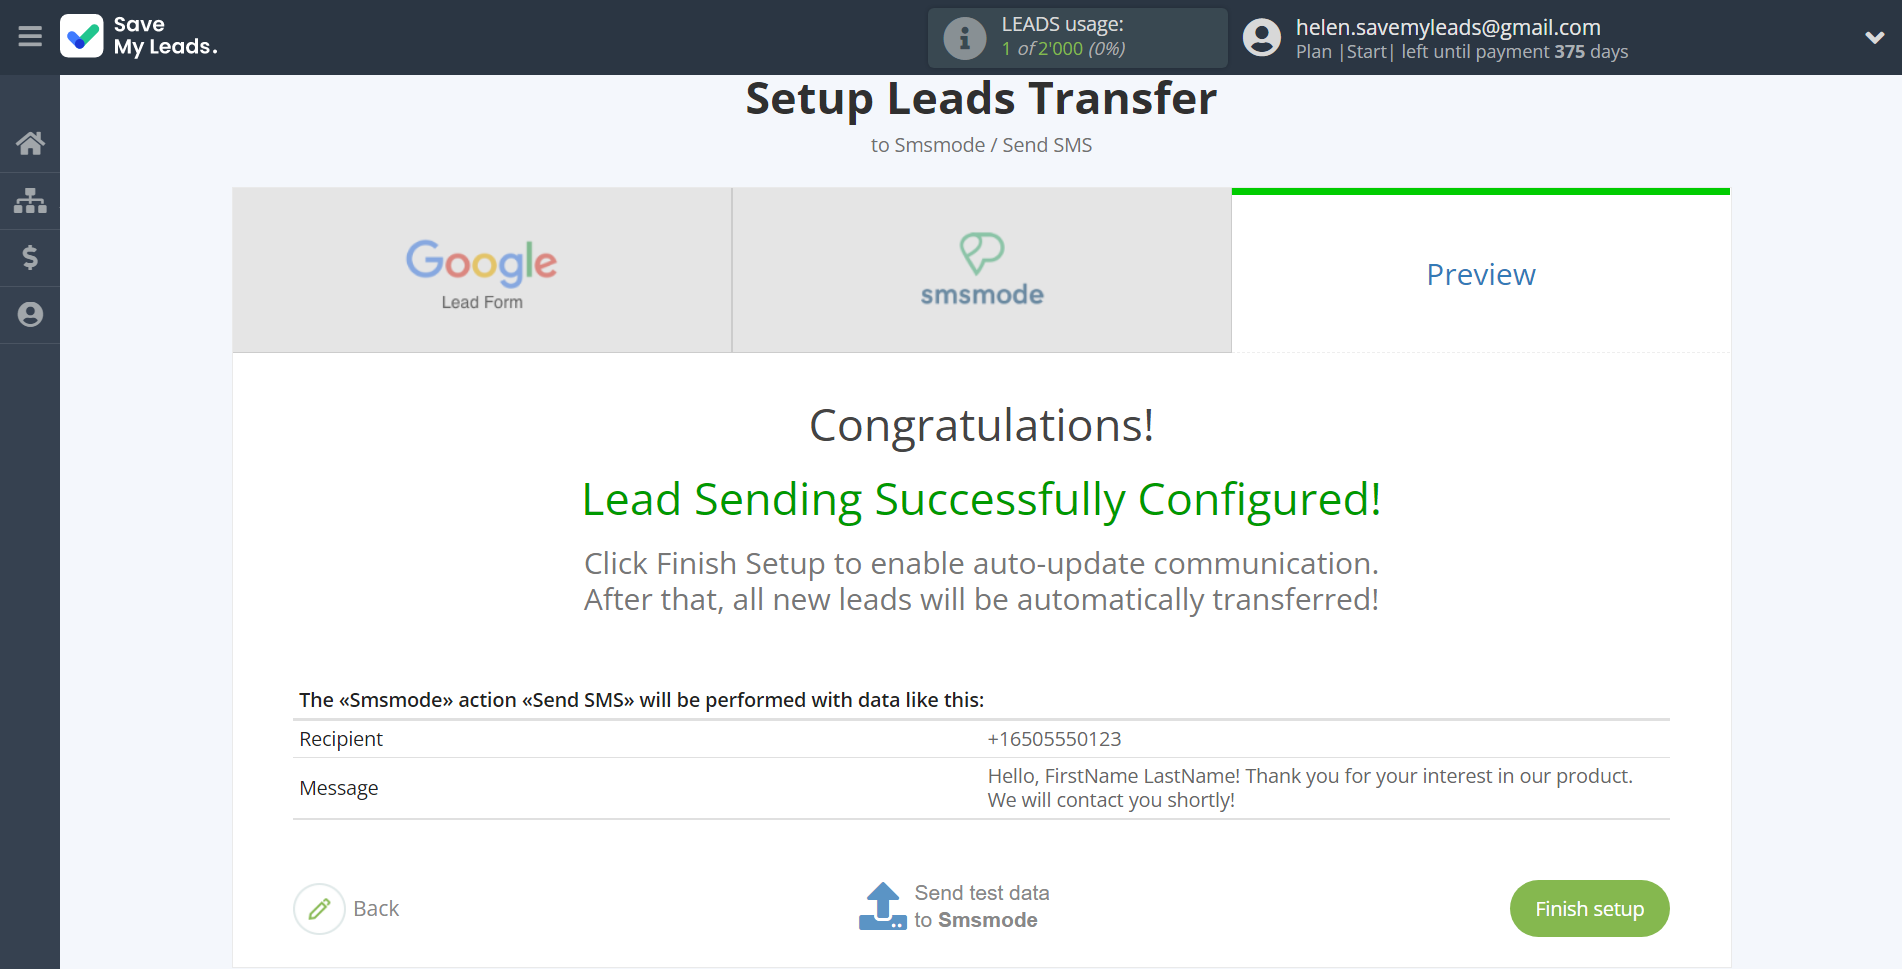 How to Connect Google Lead Form with Smsmode | Test data